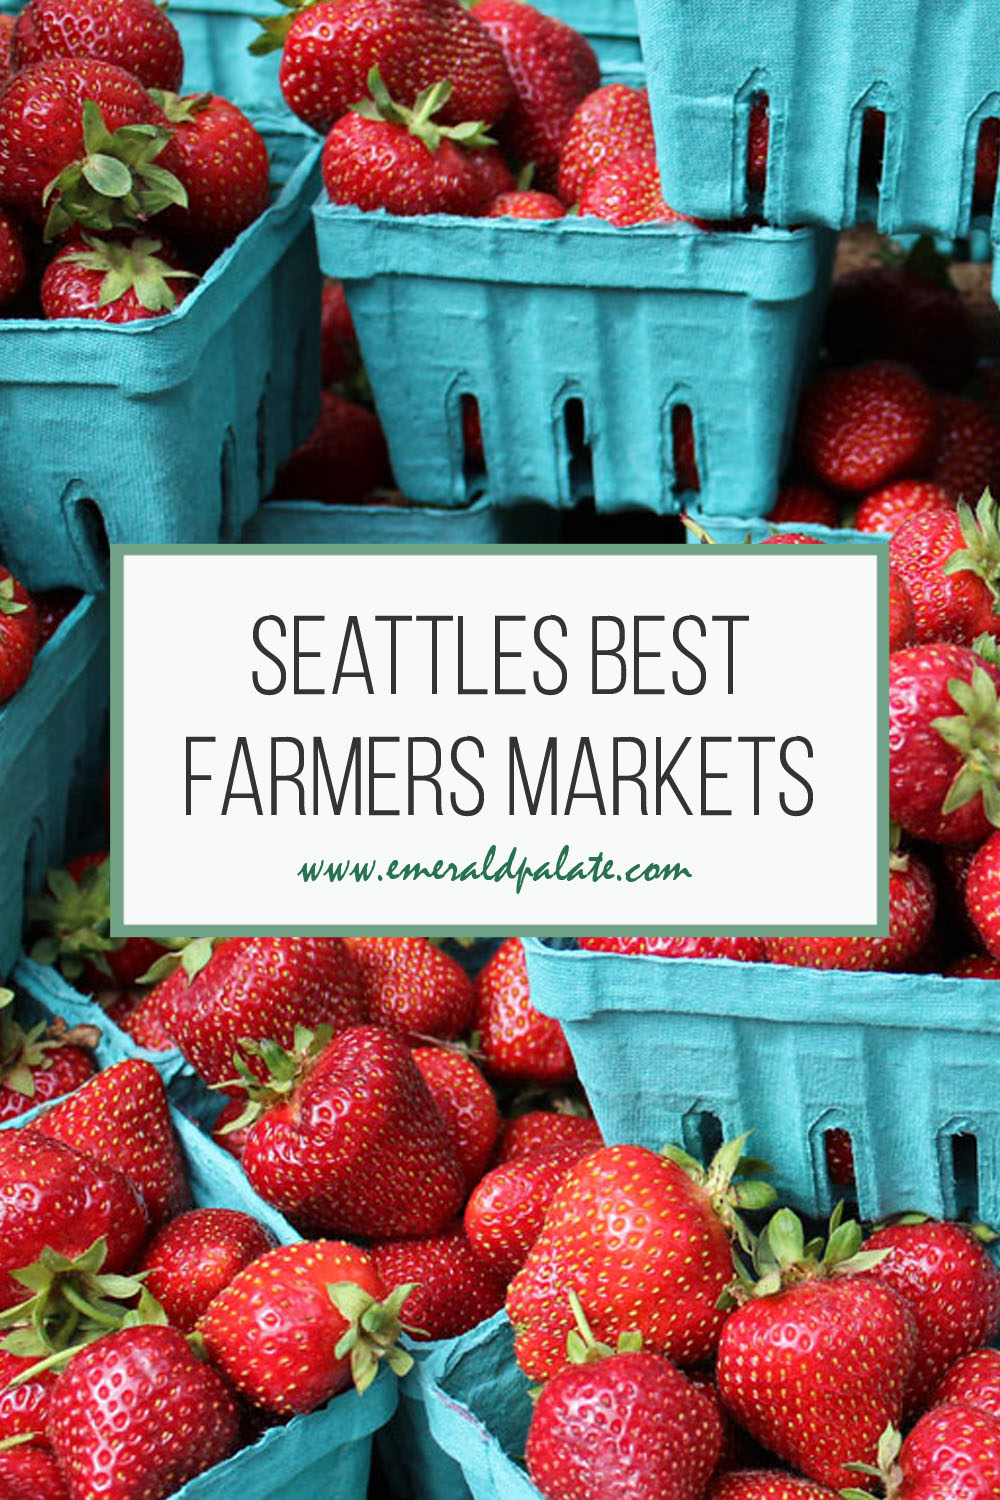 Seattles best farmers markets, as told by a local. Discover which are seasonal vs. year round markets, can't miss vendors, and what time to visit each market in Seattle. Get ready to visit Washington farms and buy the best Seattle souvenirs from makers!